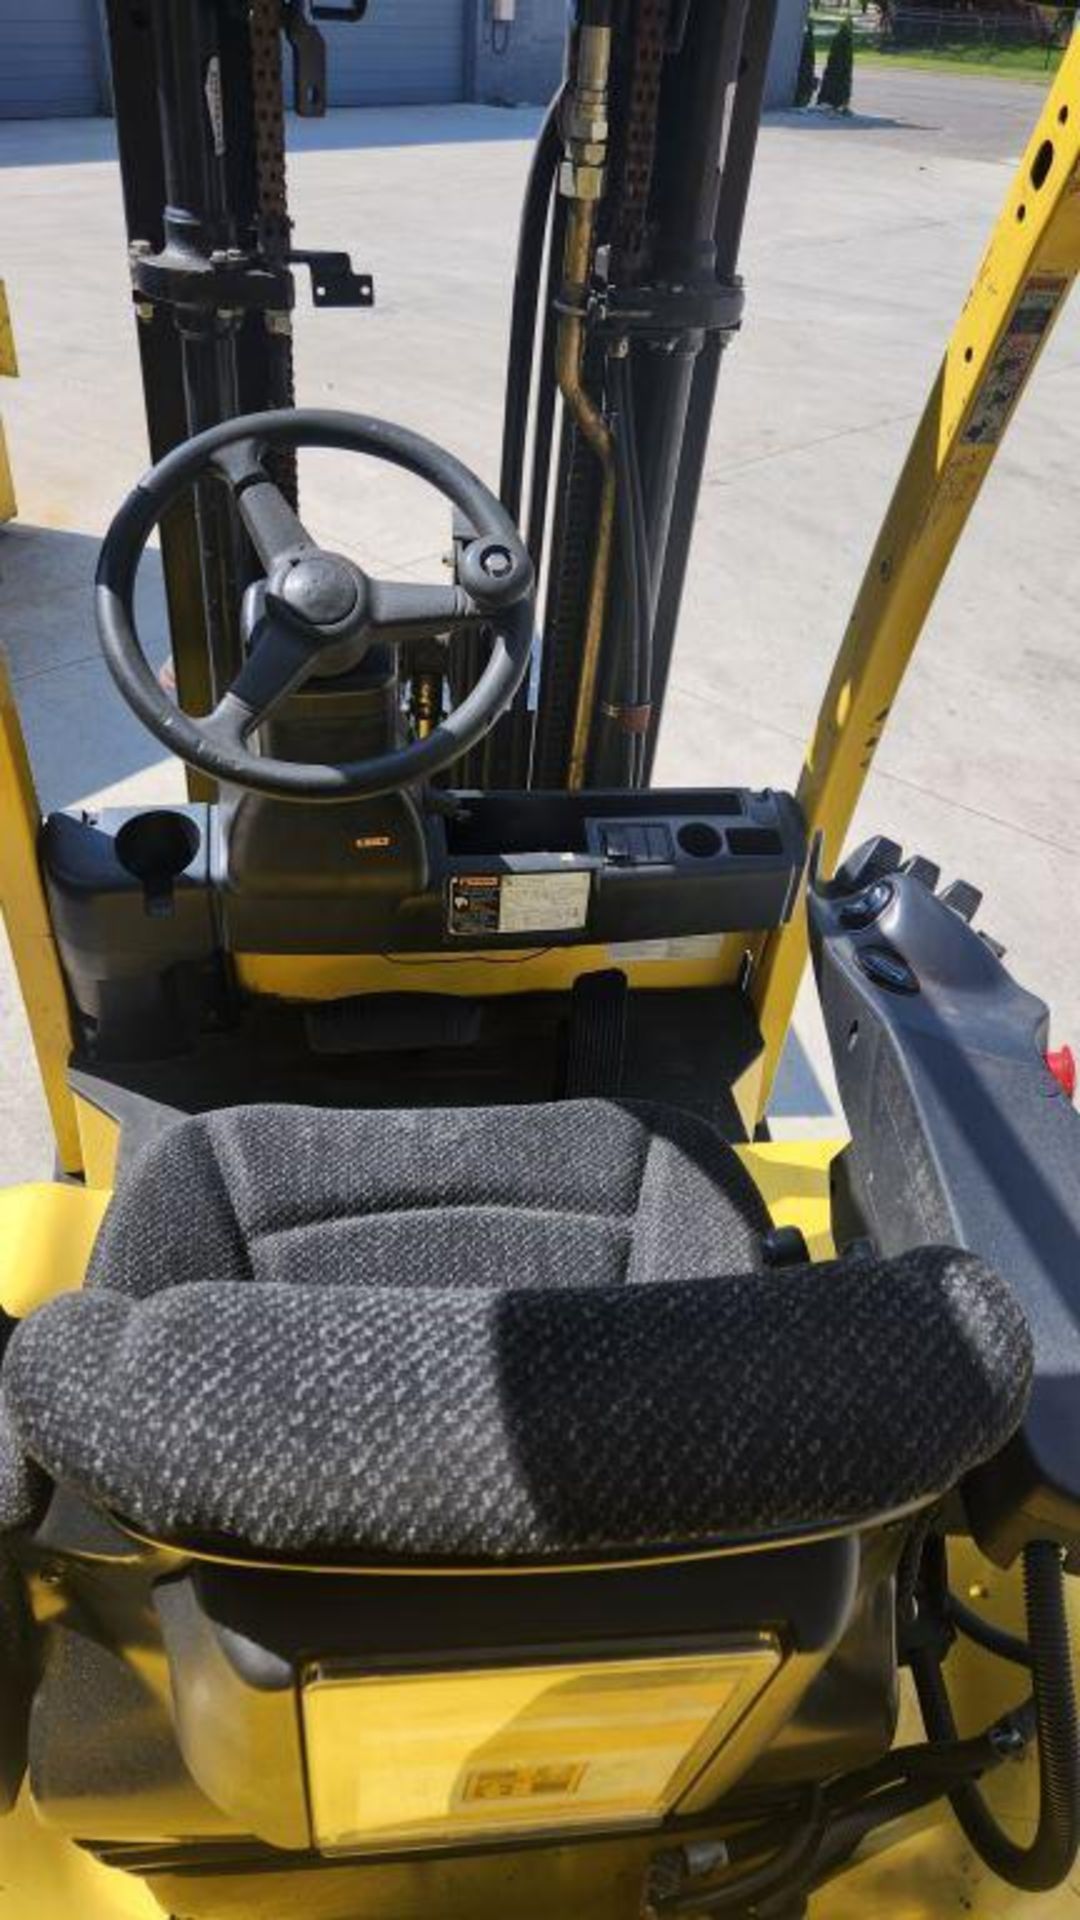 2013 Hyster E45XN-33 Electric Forklift - Image 6 of 8